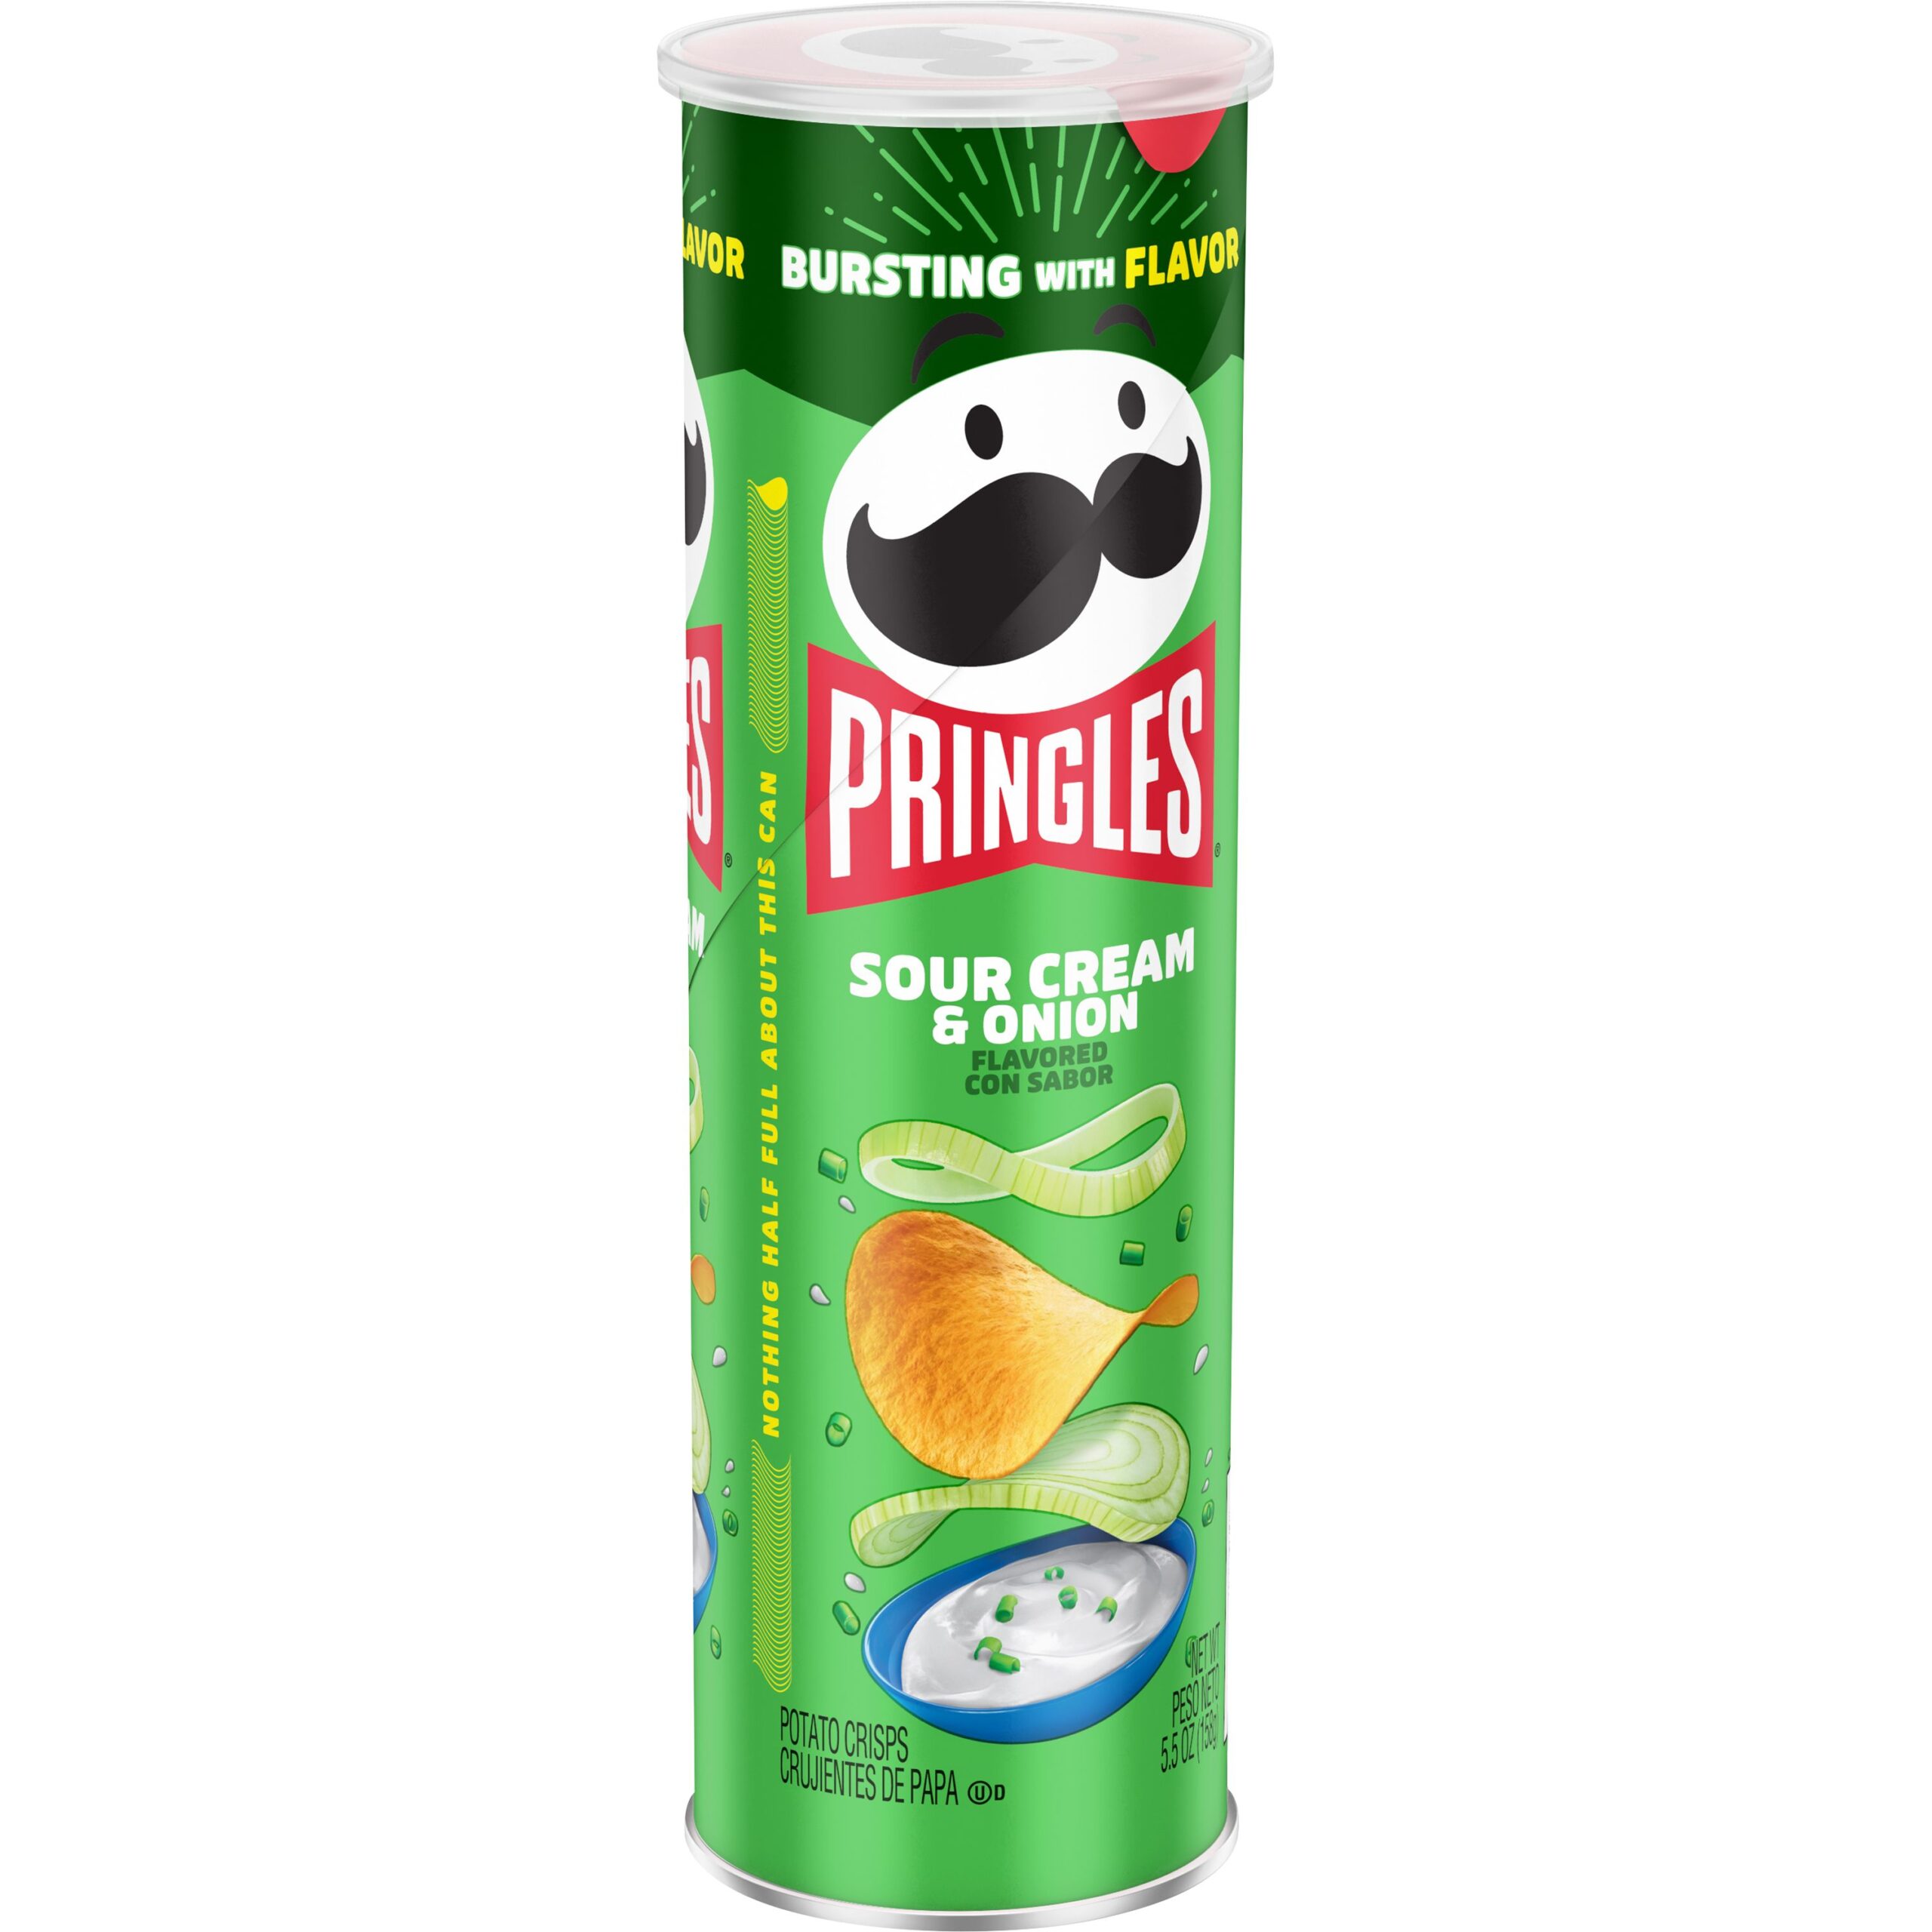 how many calories in a can of pringles